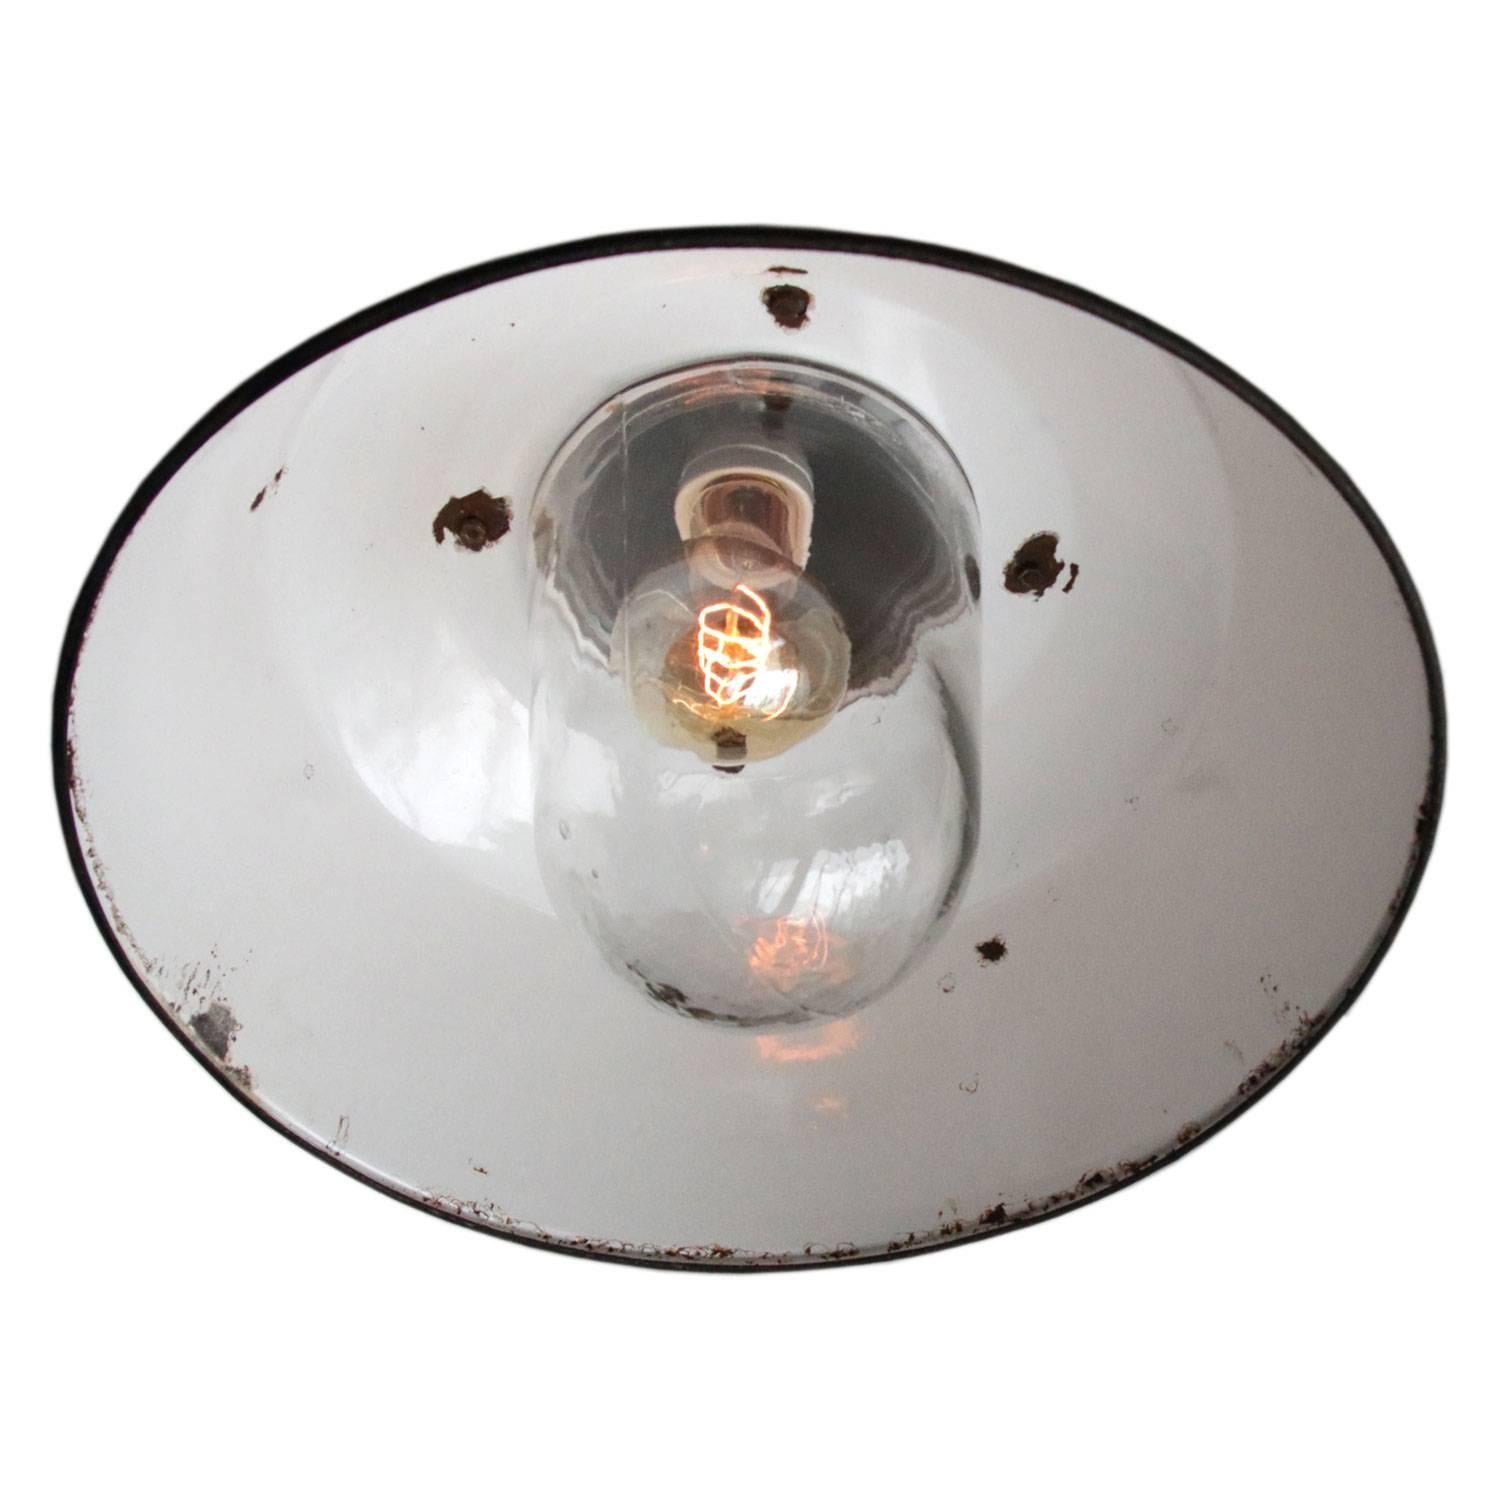 Factory hanging lamp. White enamel white interior. Cast iron top with clear glass.

Weight: 5.5 kg / 12.1 lb

All lamps have been made suitable by international standards for incandescent light bulbs, energy-efficient and LED bulbs. E26/E27 bulb